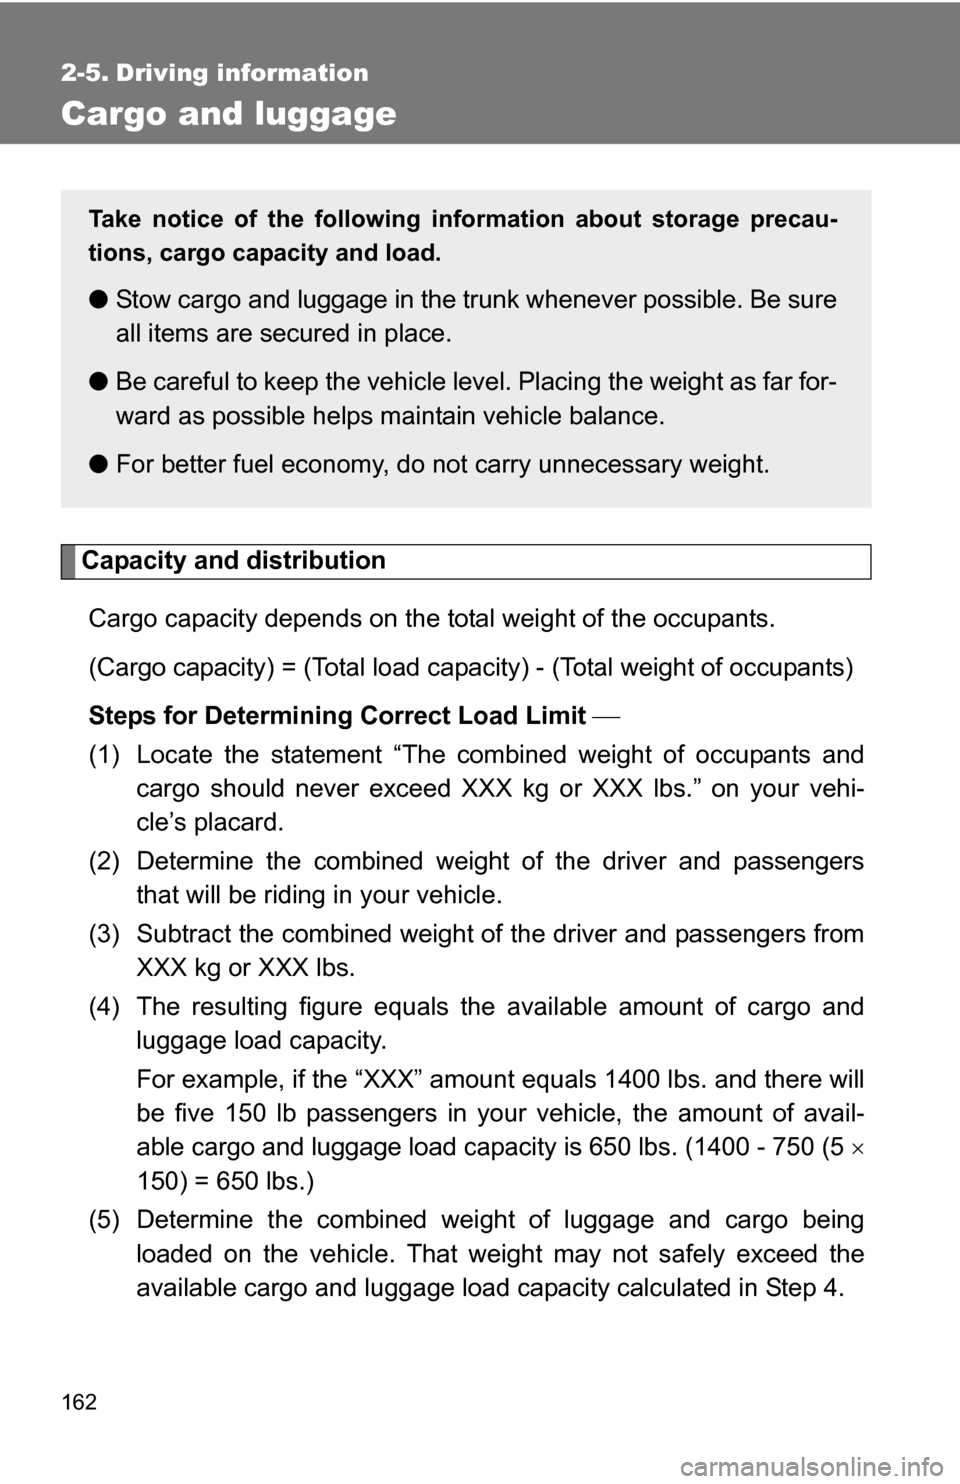 TOYOTA COROLLA 2009 10.G Owners Manual 162
2-5. Driving information
Cargo and luggage
Capacity and distributionCargo capacity depends on the total weight of the occupants. 
(Cargo capacity) = (Total load capacity) - (Total weight of occupa